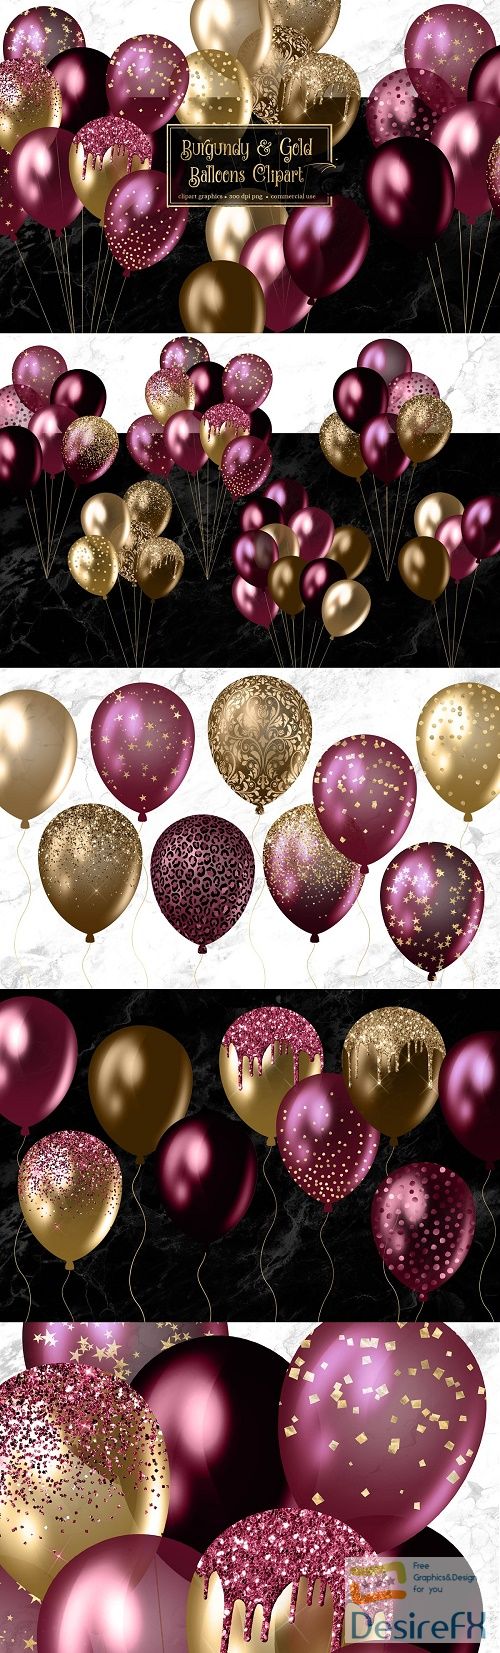 Burgundy and Gold Balloons Clipart - 4465656